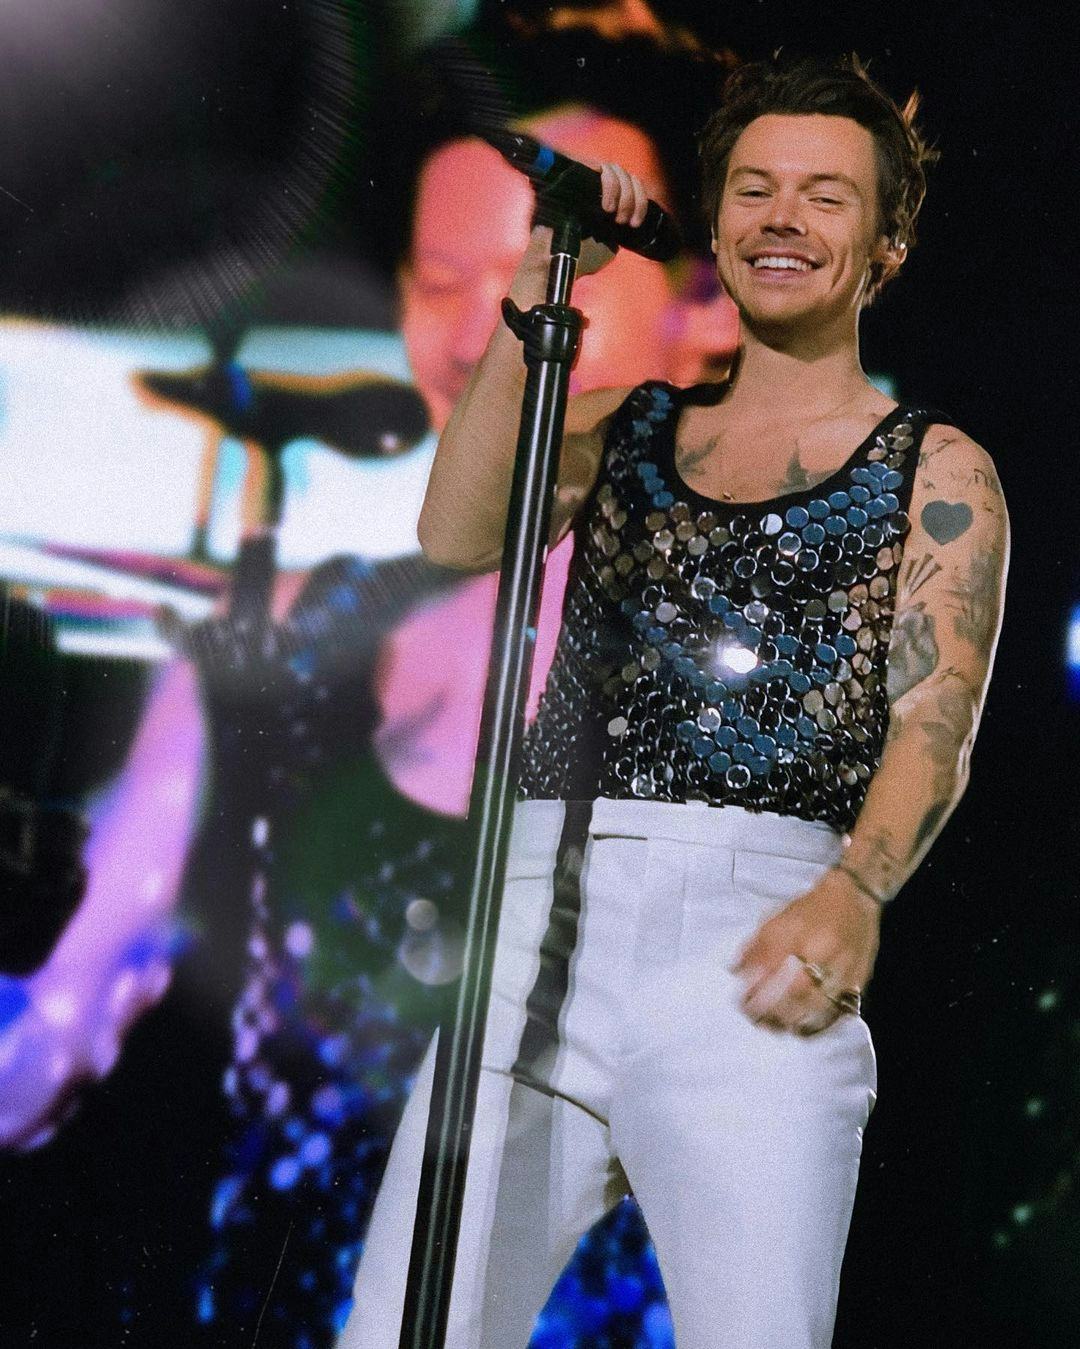 Harry Styles in sequin top and white suit pants performing on stage live at Wembley Stadium for Love on Tour concert.